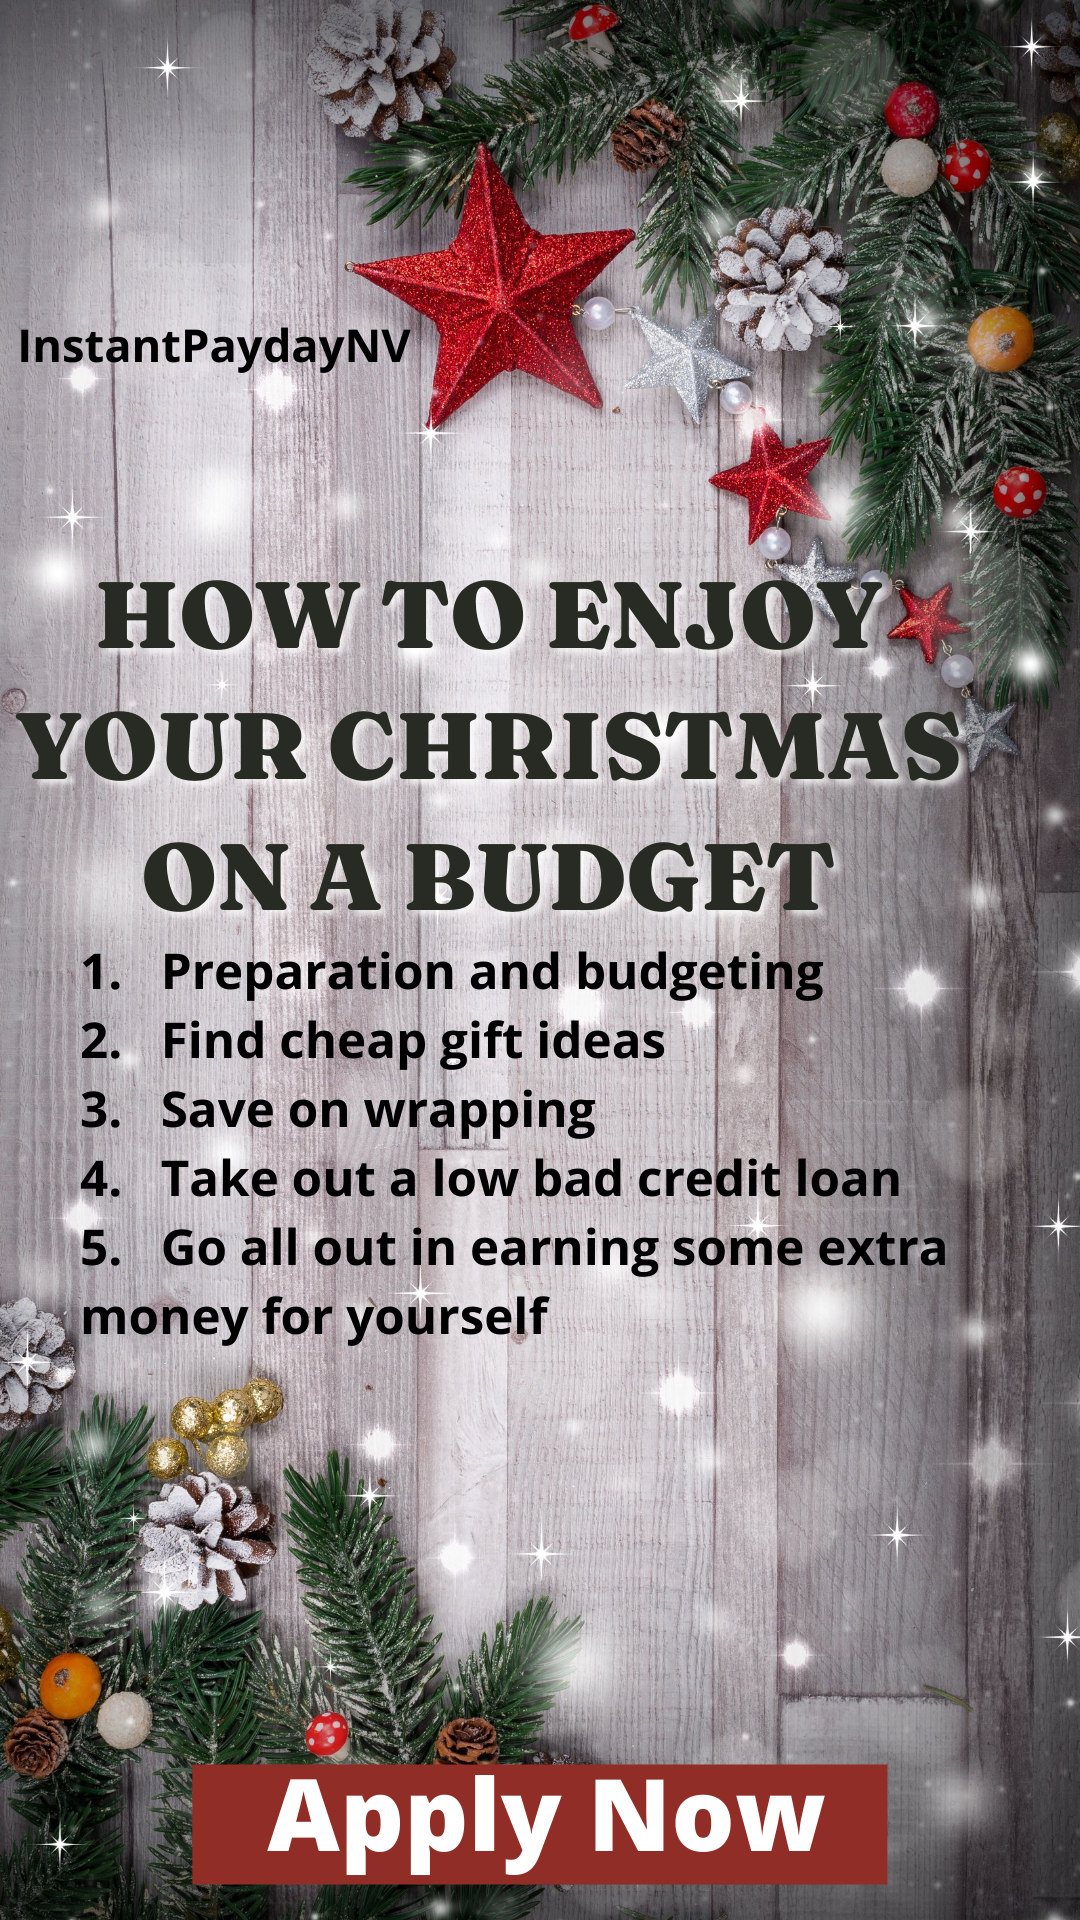 How to Enjoy Your Christmas on a Budget